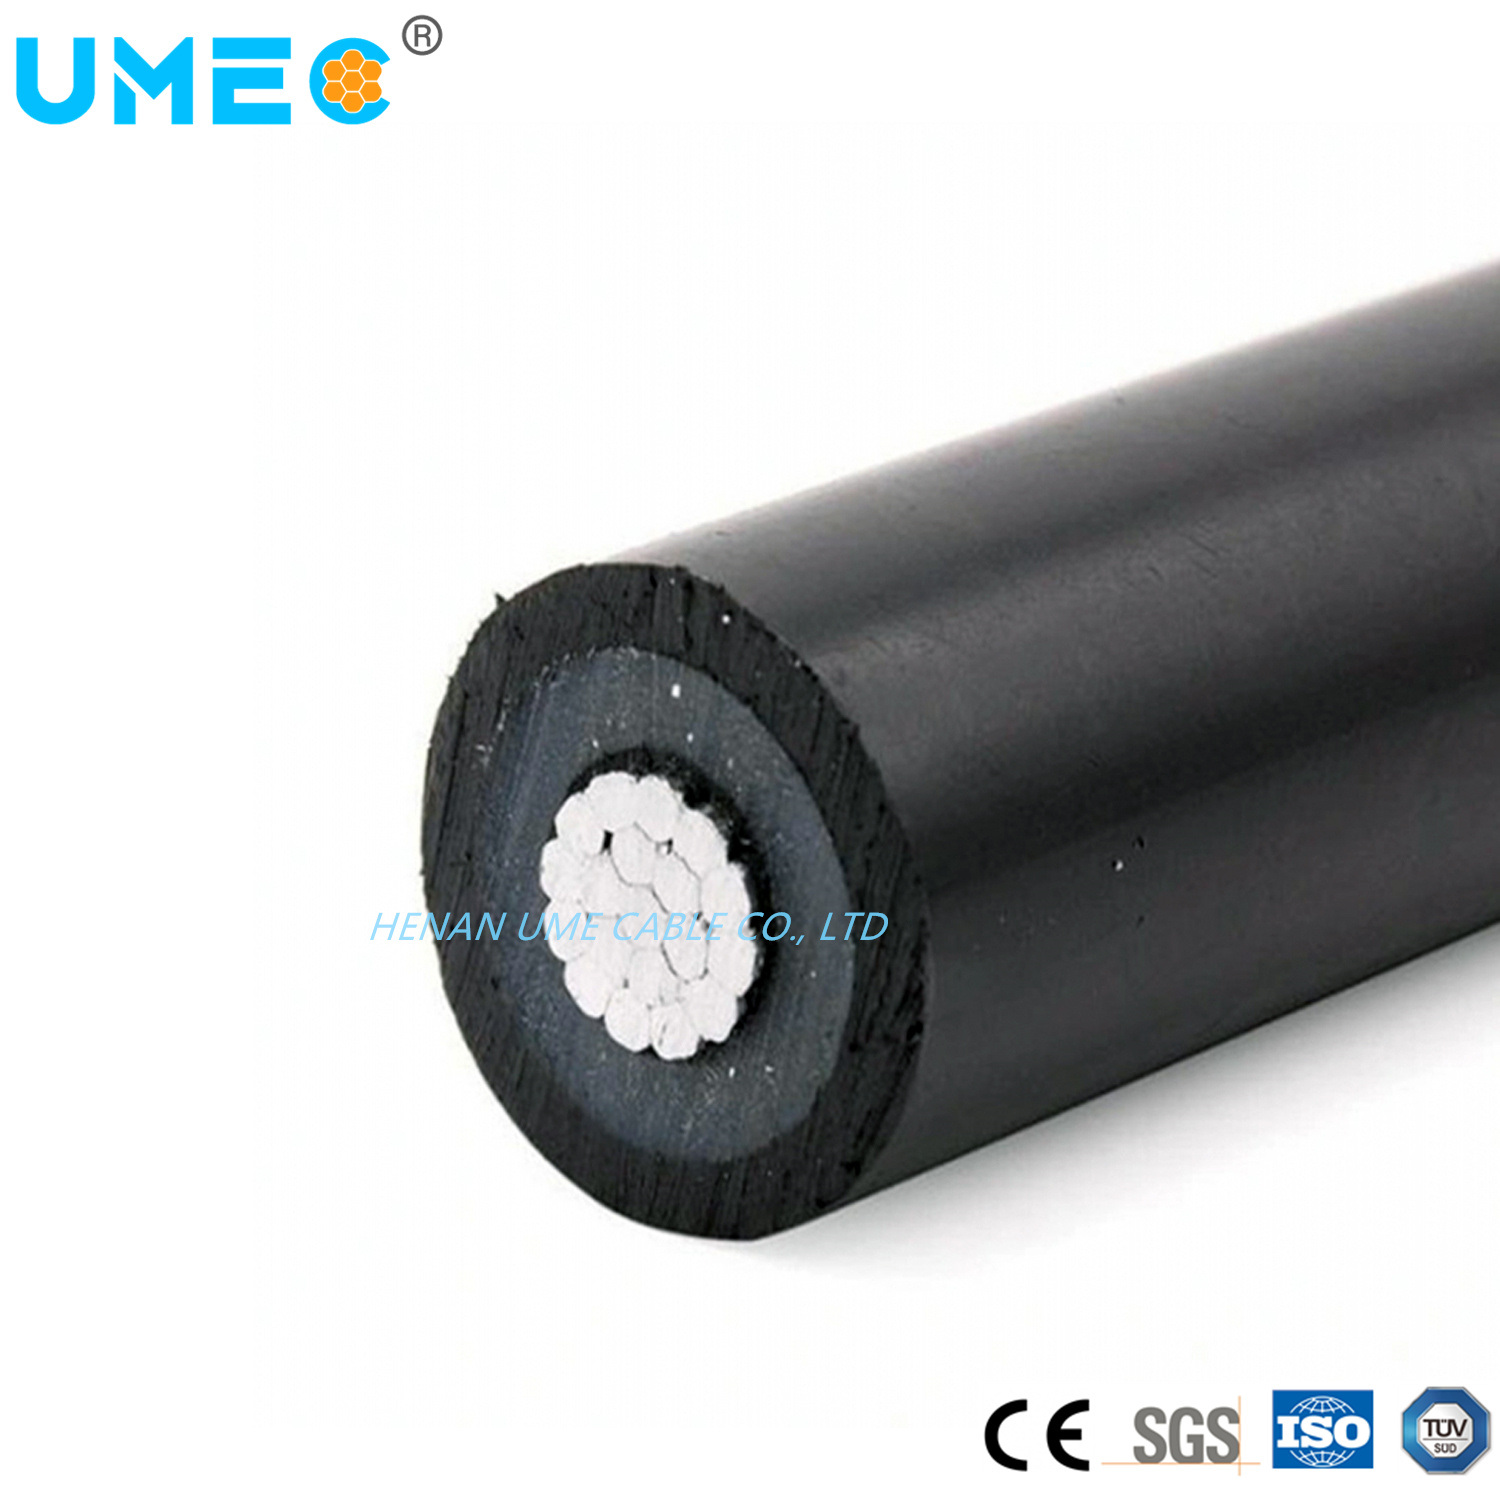 Power Tansmission Line Electrical Cable Wire HDPE XLPE Insulated Walnut Butternut Pignut Beech Chestnut Hackberry Code Covered Line Wire